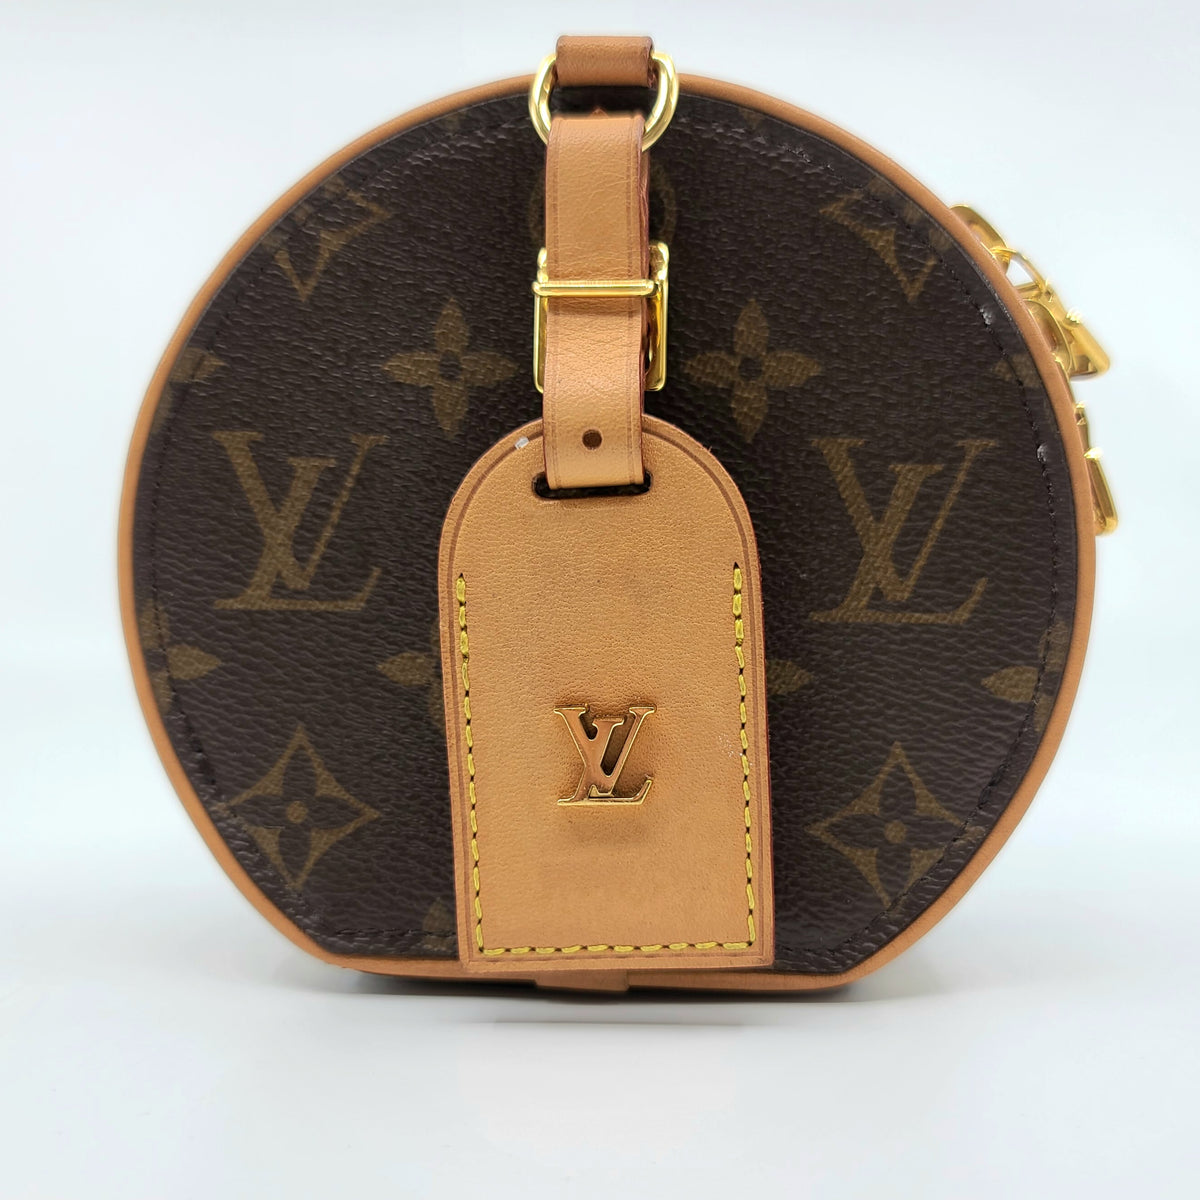 Round handles with a chrome leather - like on a vuitton bag - How